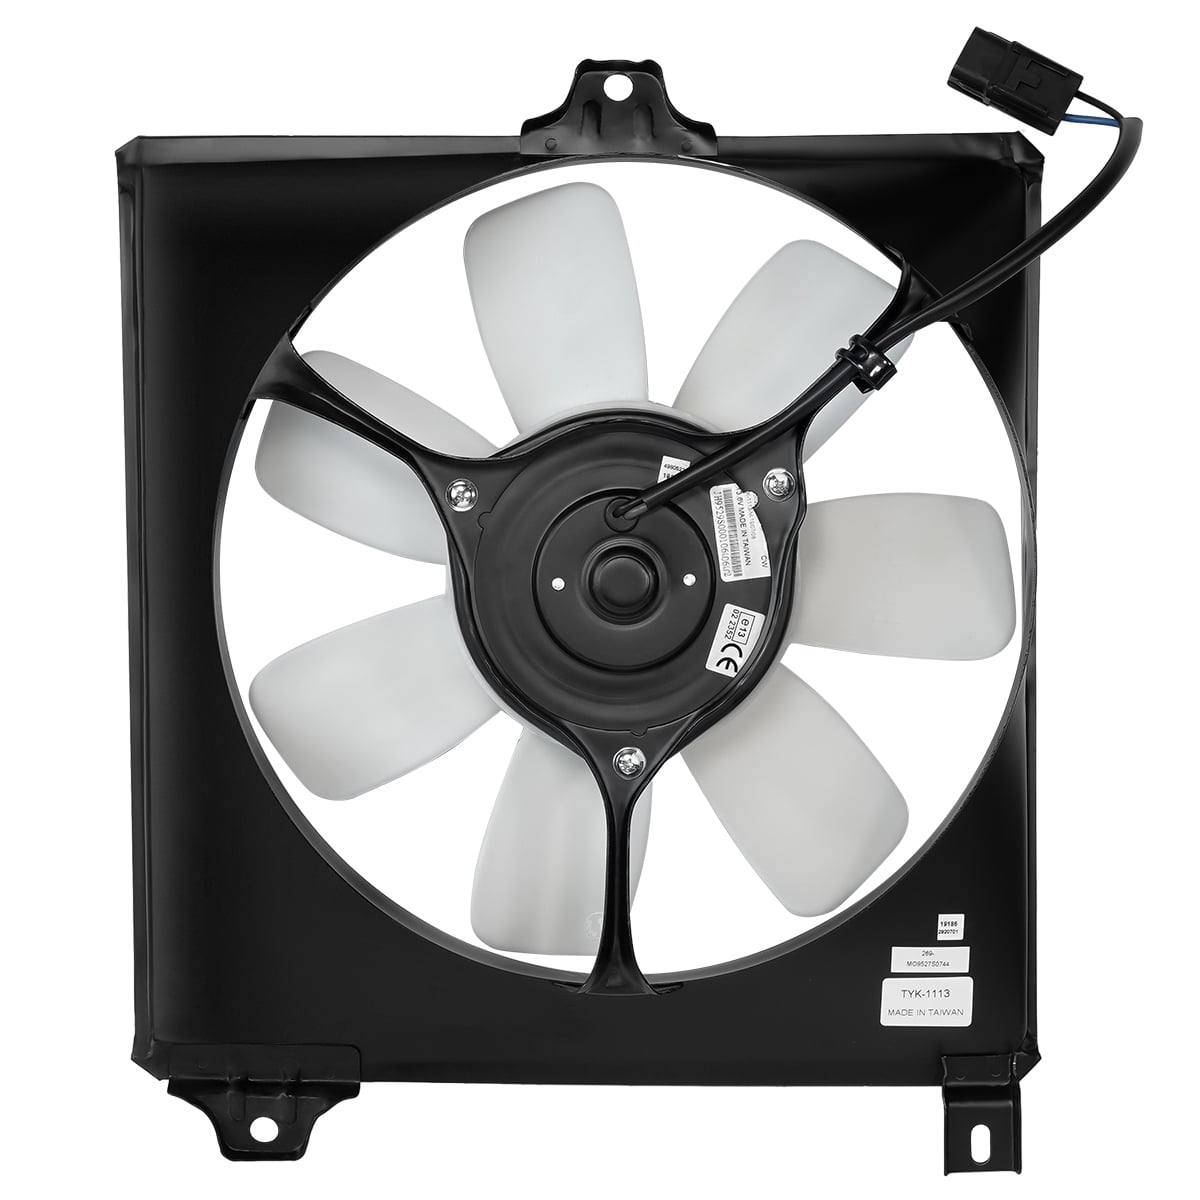 NEW A/C CONDENSER FAN FITS TOYOTA RAV4 1996-2000 1636374190 8845442021 TO3113109